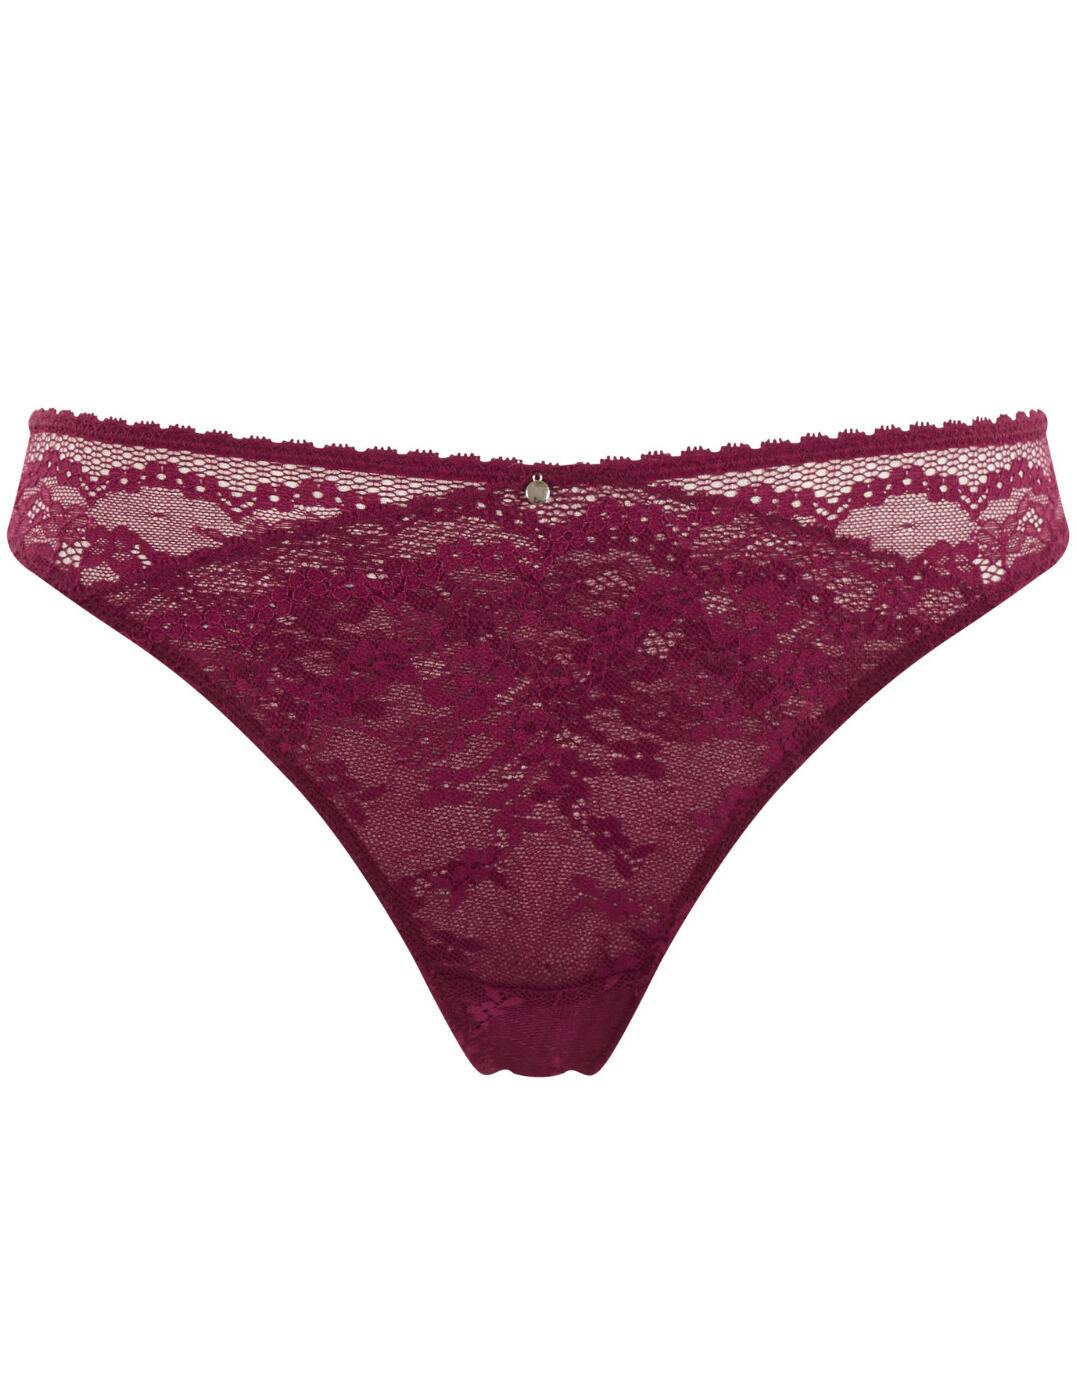 Cleo by Panache Alexis Thong - Belle Lingerie | Cleo by Panache Alexis ...